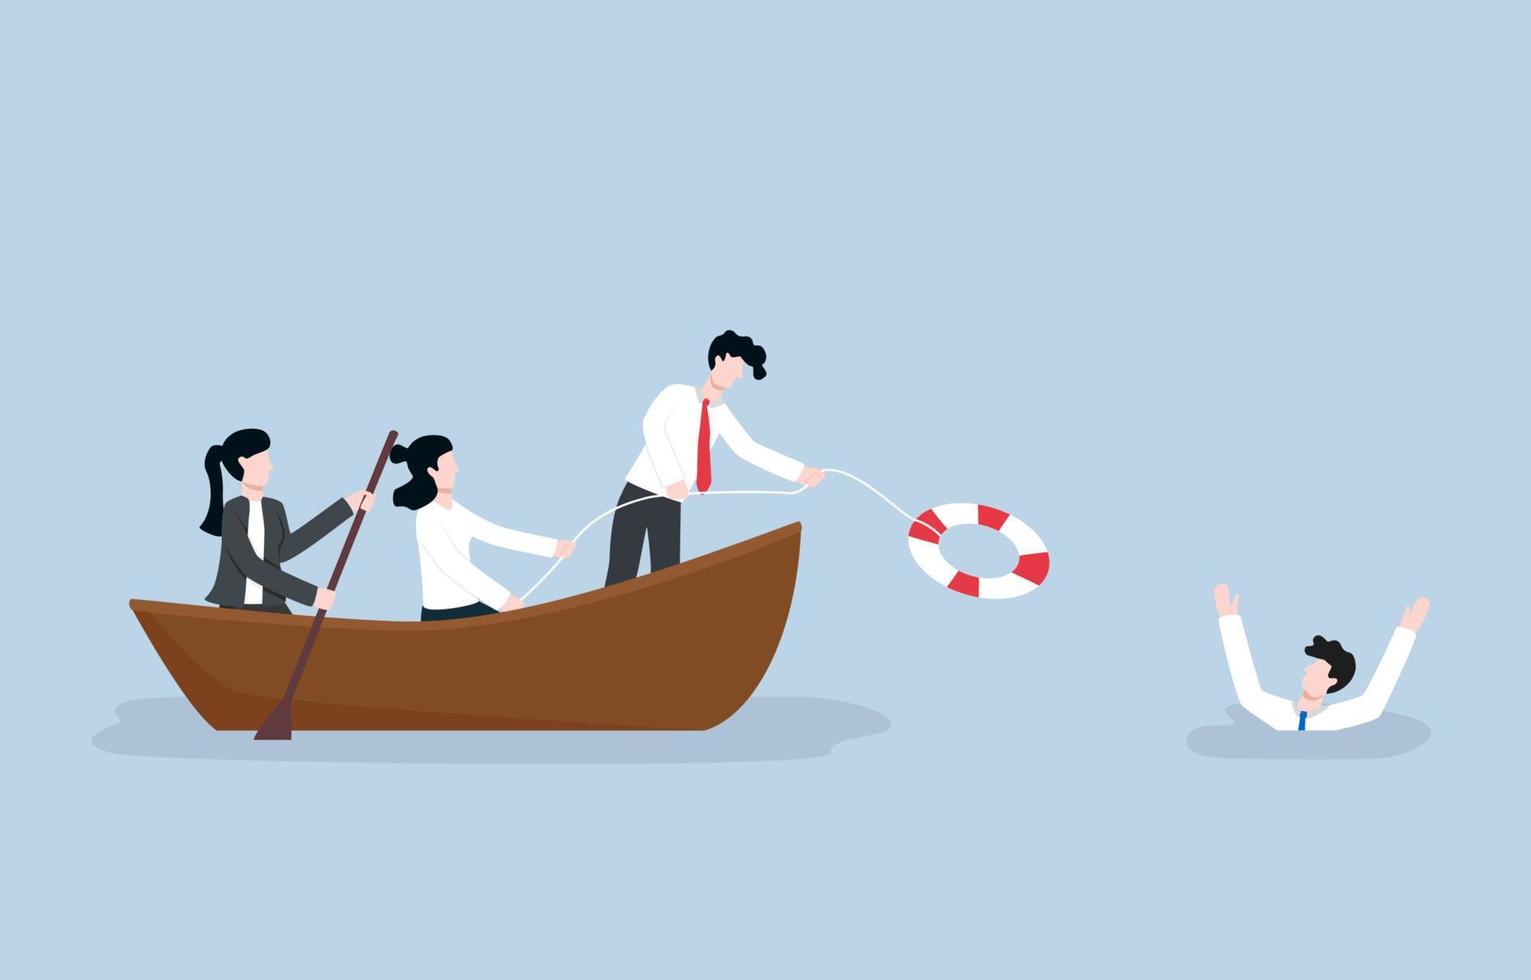 Assistance in business team, group, or workplace, helping colleague from working mistake to succeed together again concept. Employees row a boat and throw rubber ring to save drowning colleague. vector